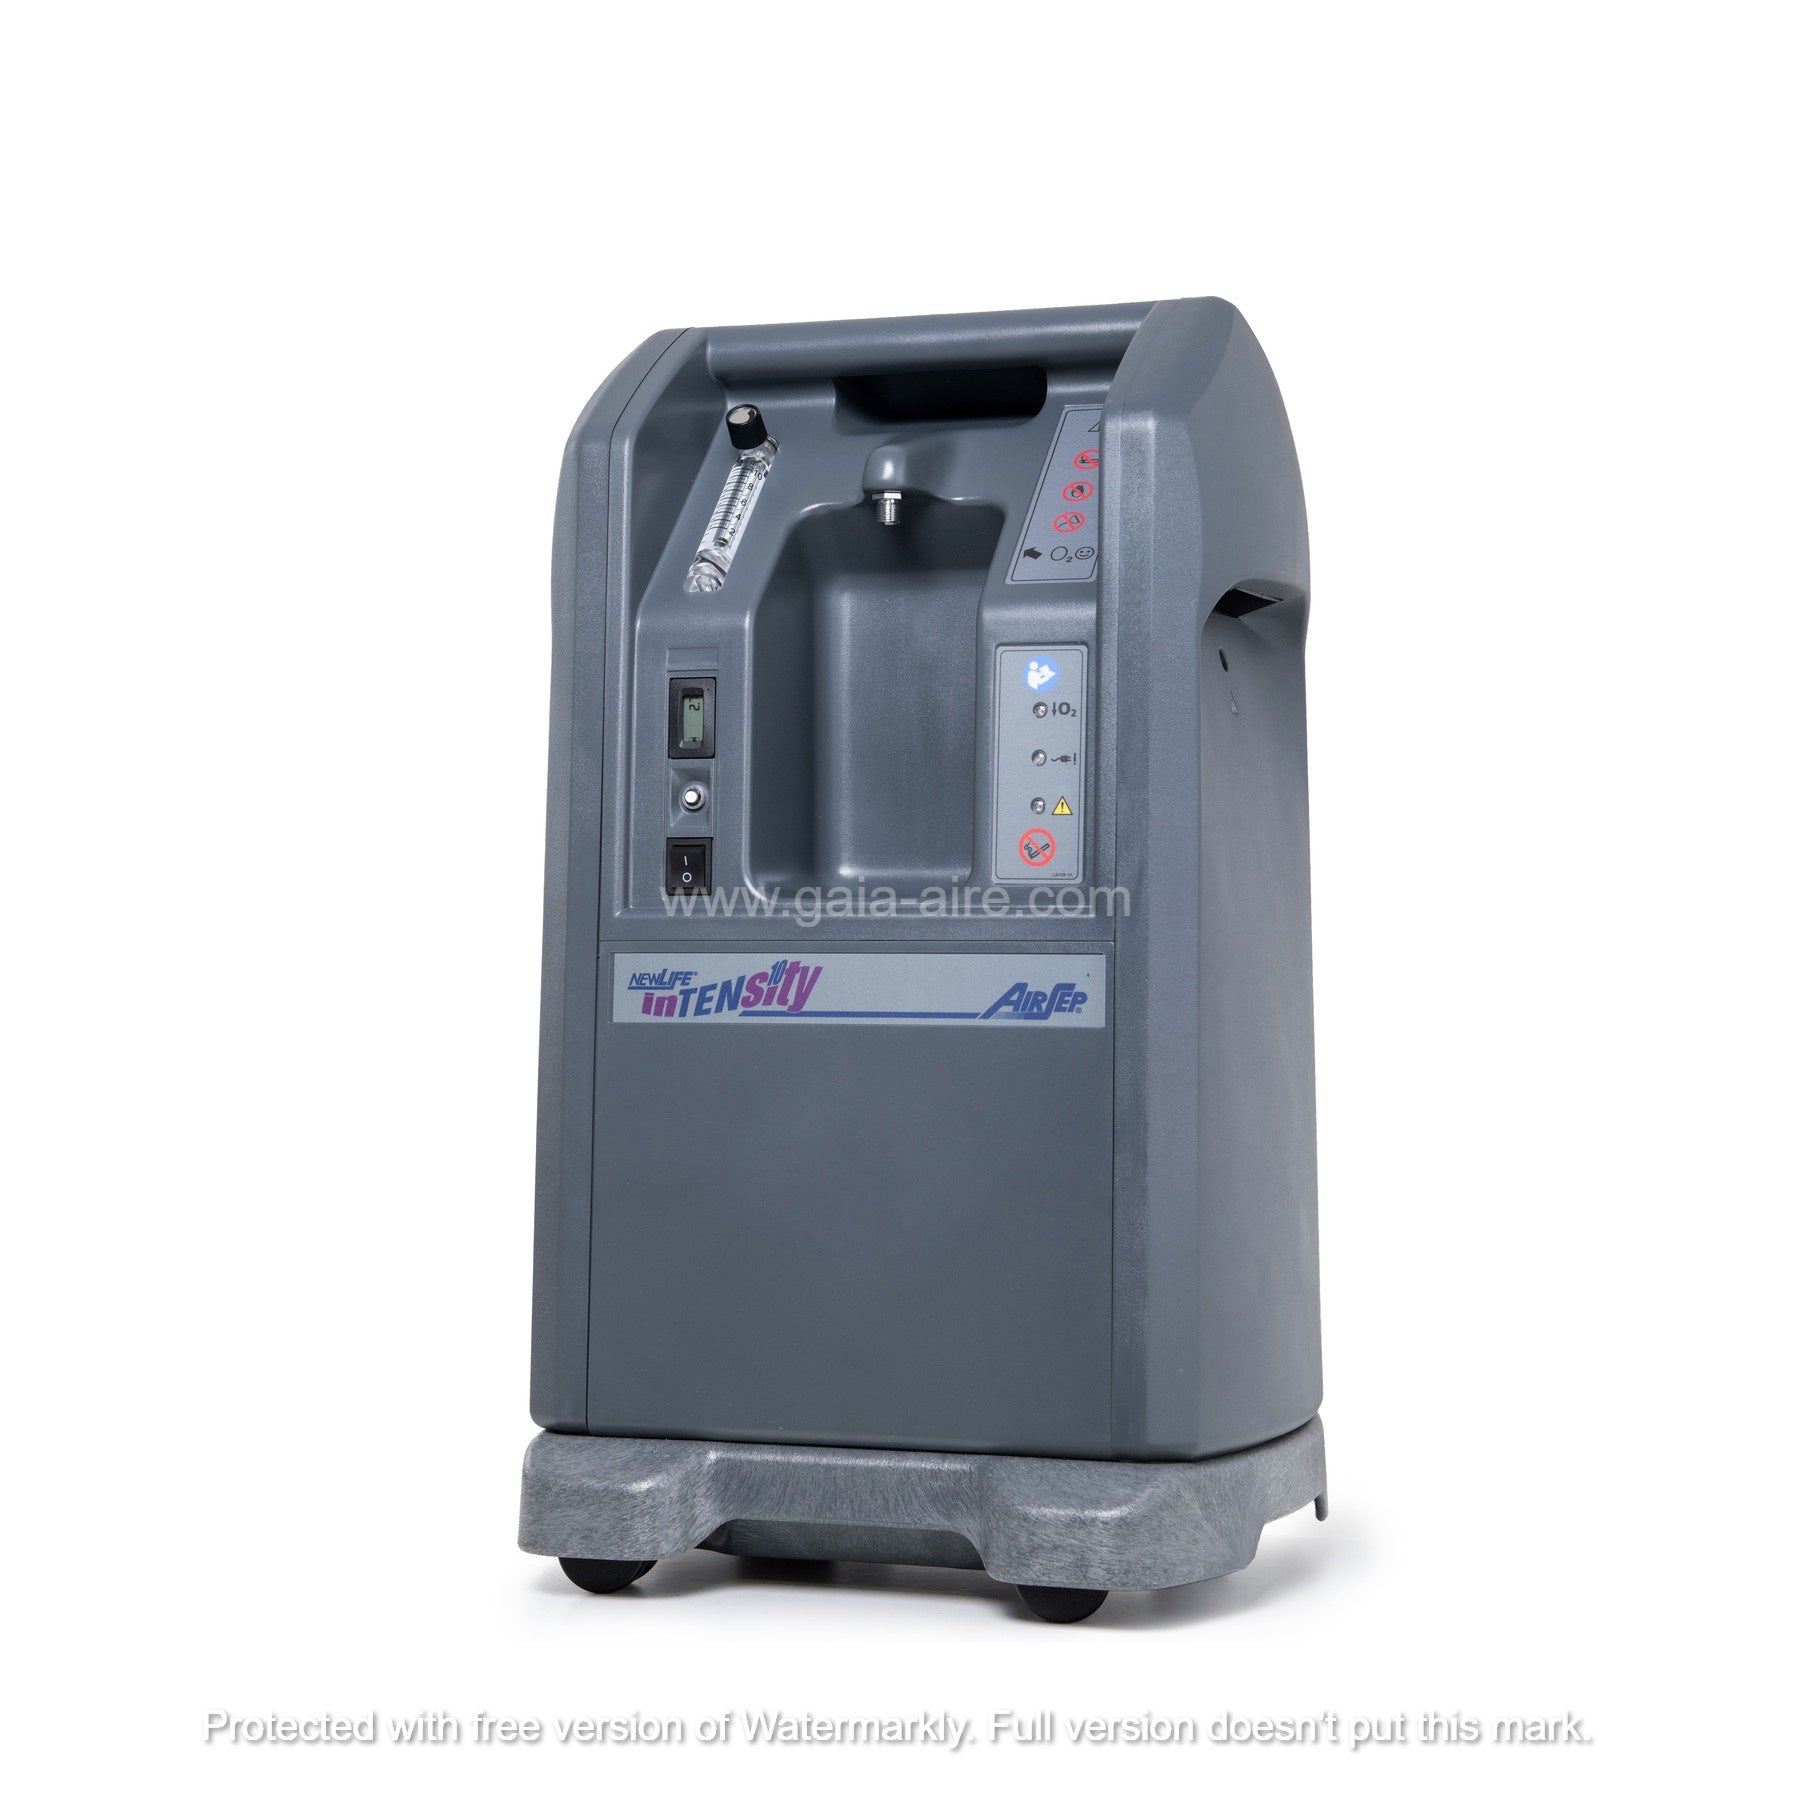 AirSep NewLife Intensity 10 Oxygen Concentrator